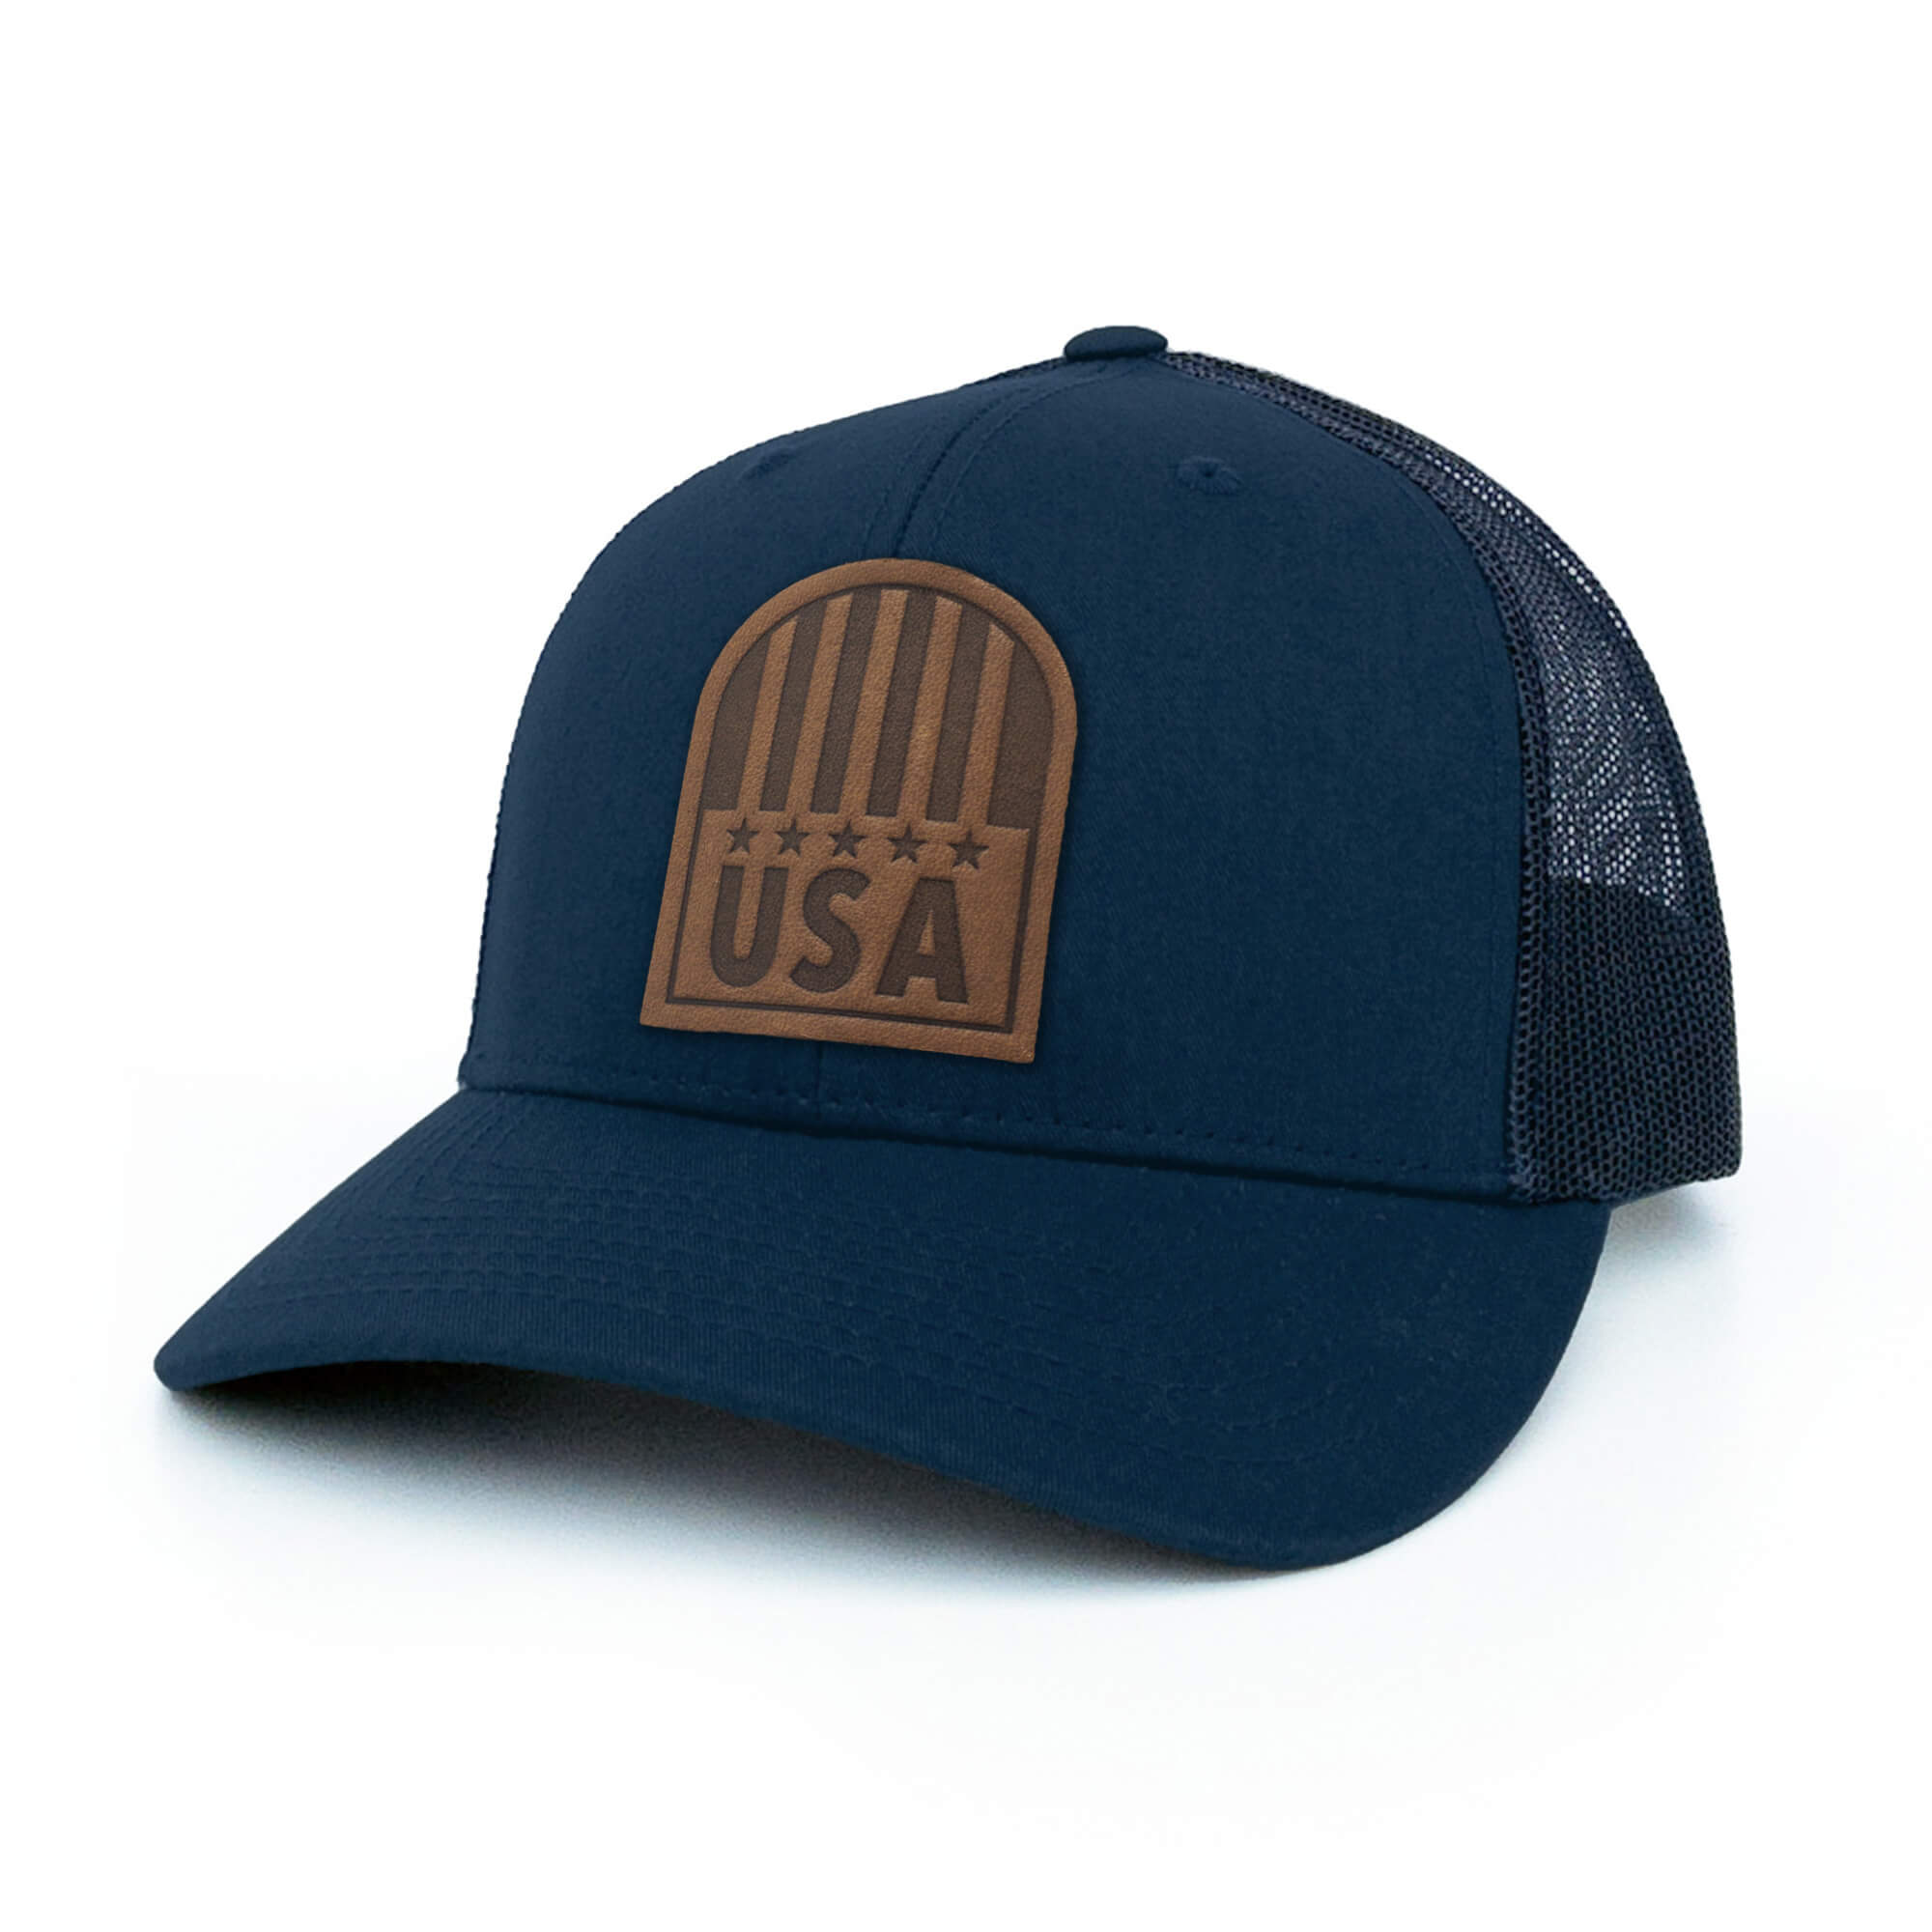 Navy trucker hat with full-grain leather patch of USA Crest | BLACK-003-013, CHARC-003-013, NAVY-003-013, HGREY-003-013, MOSS-003-013, BROWN-003-013